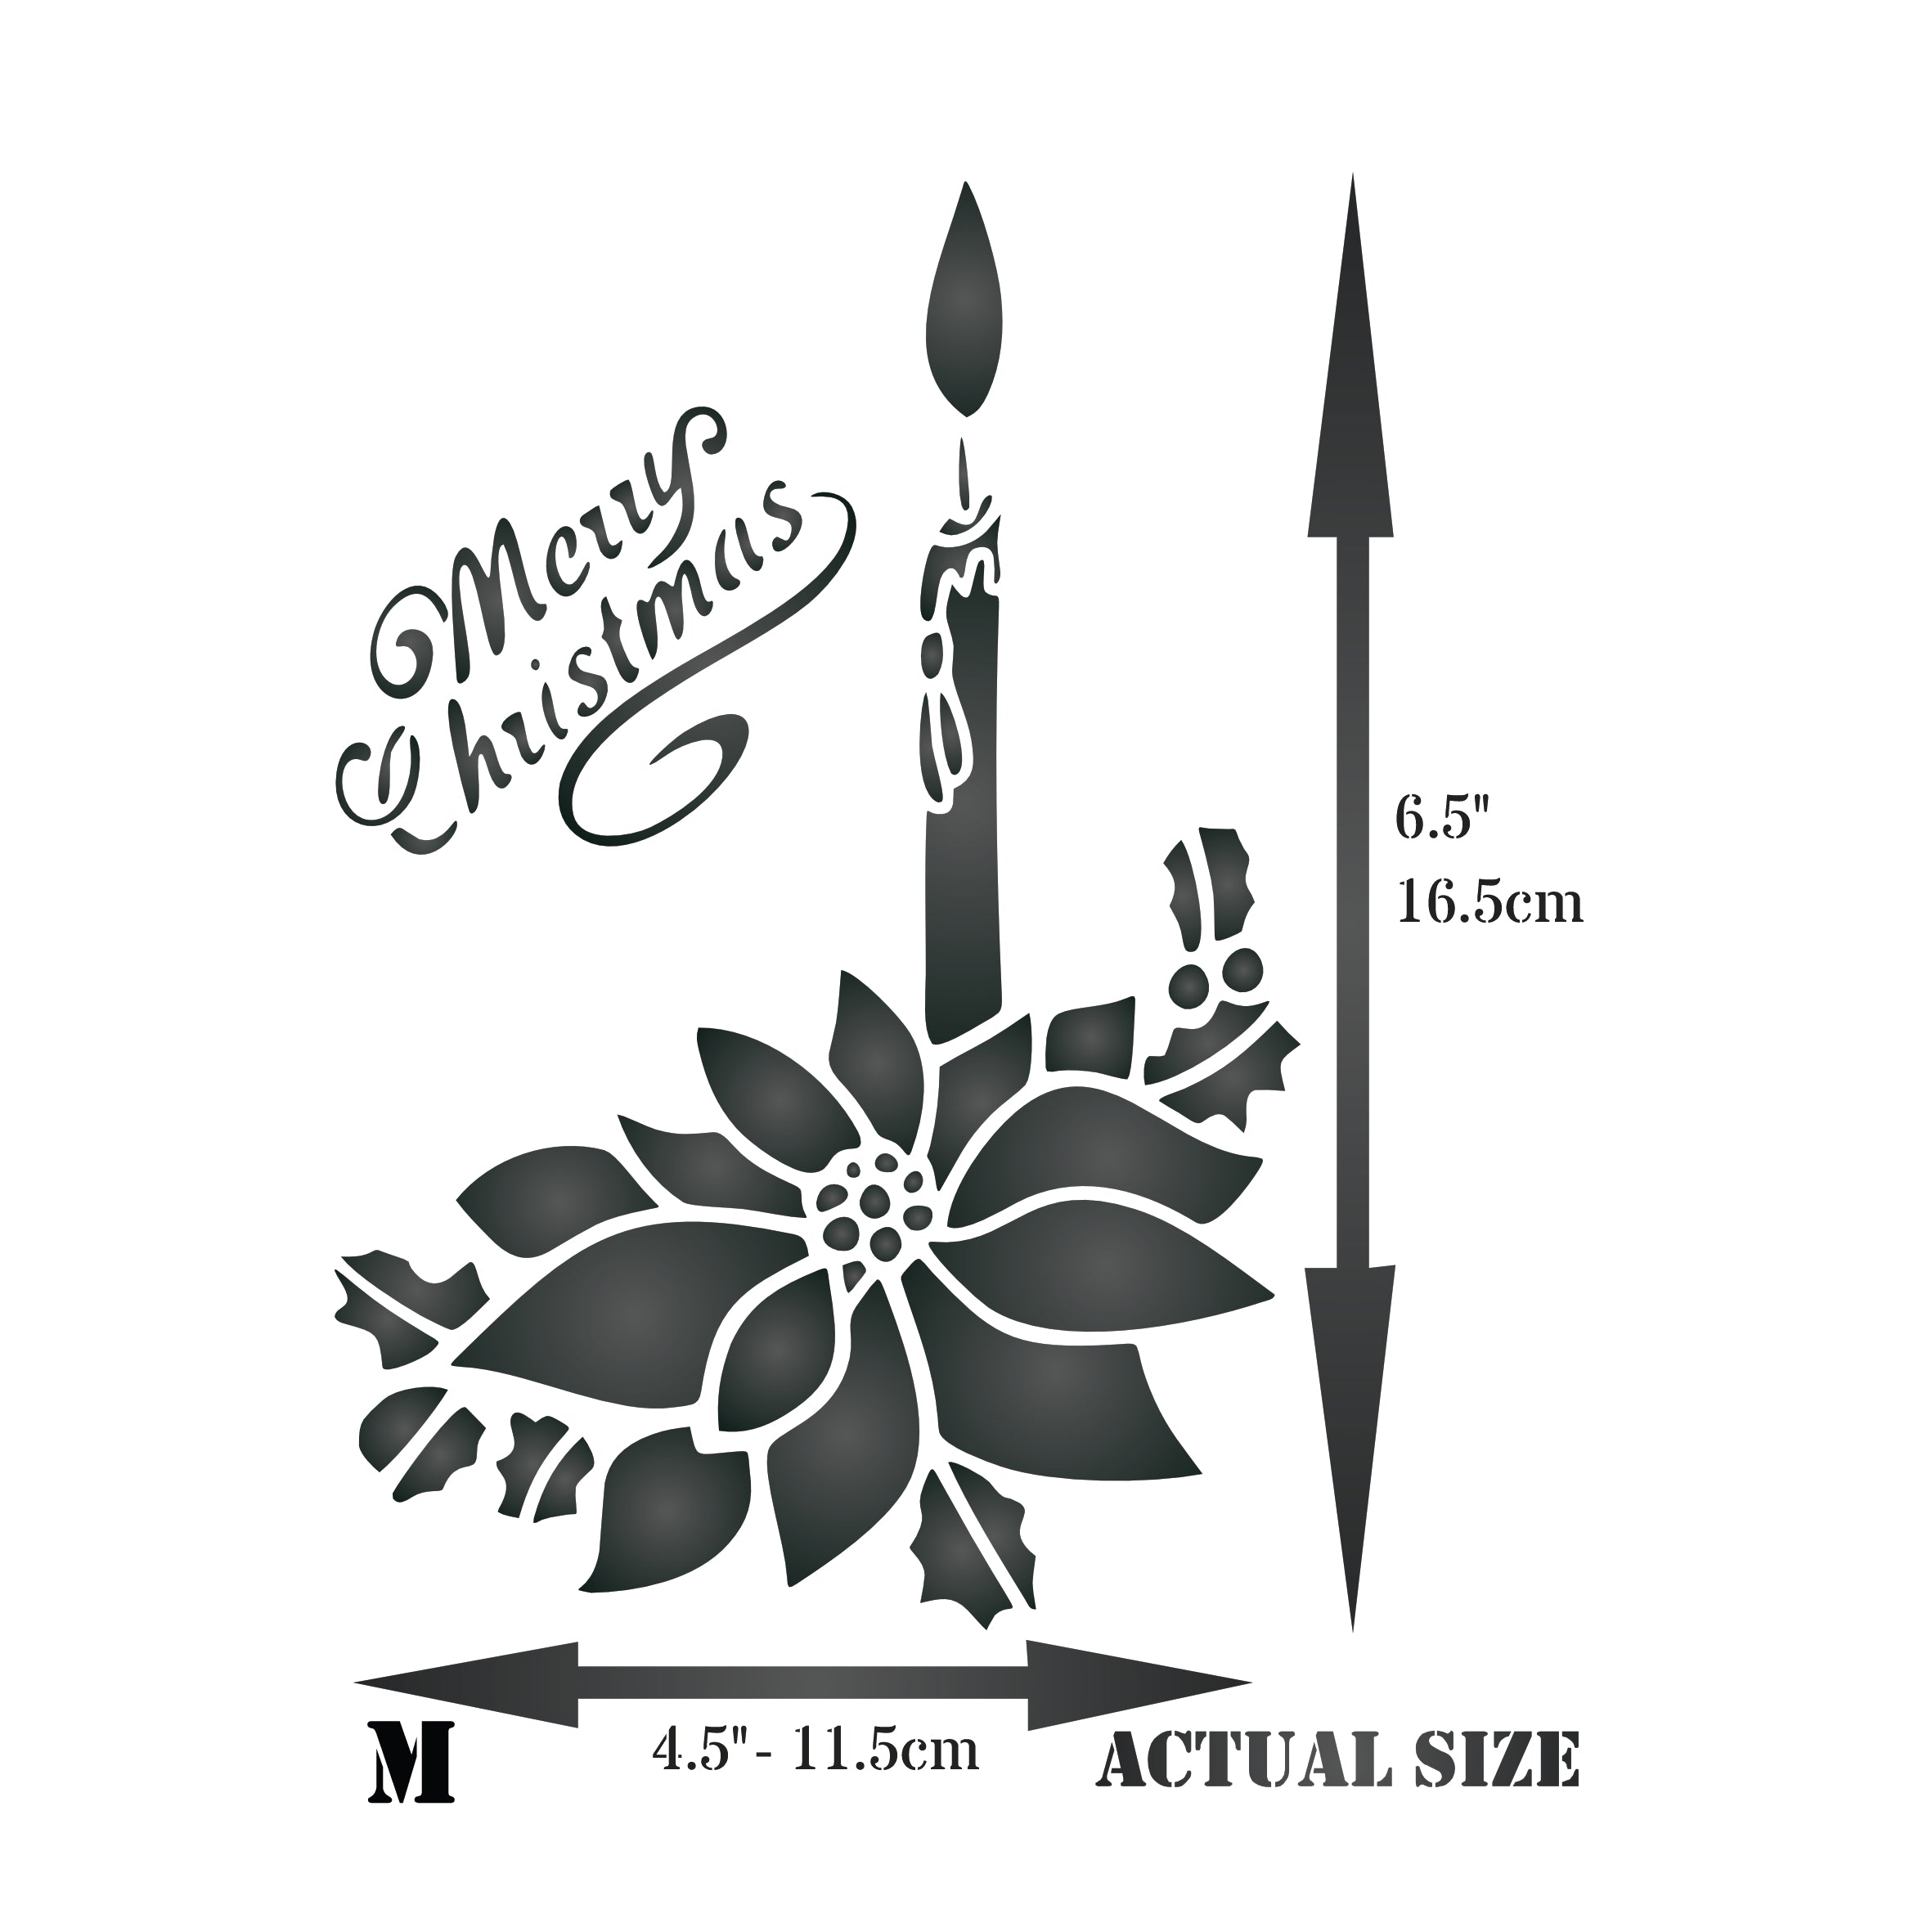 Poinsettia Candle Stencil - Merry Christmas Words Card Flower Candle